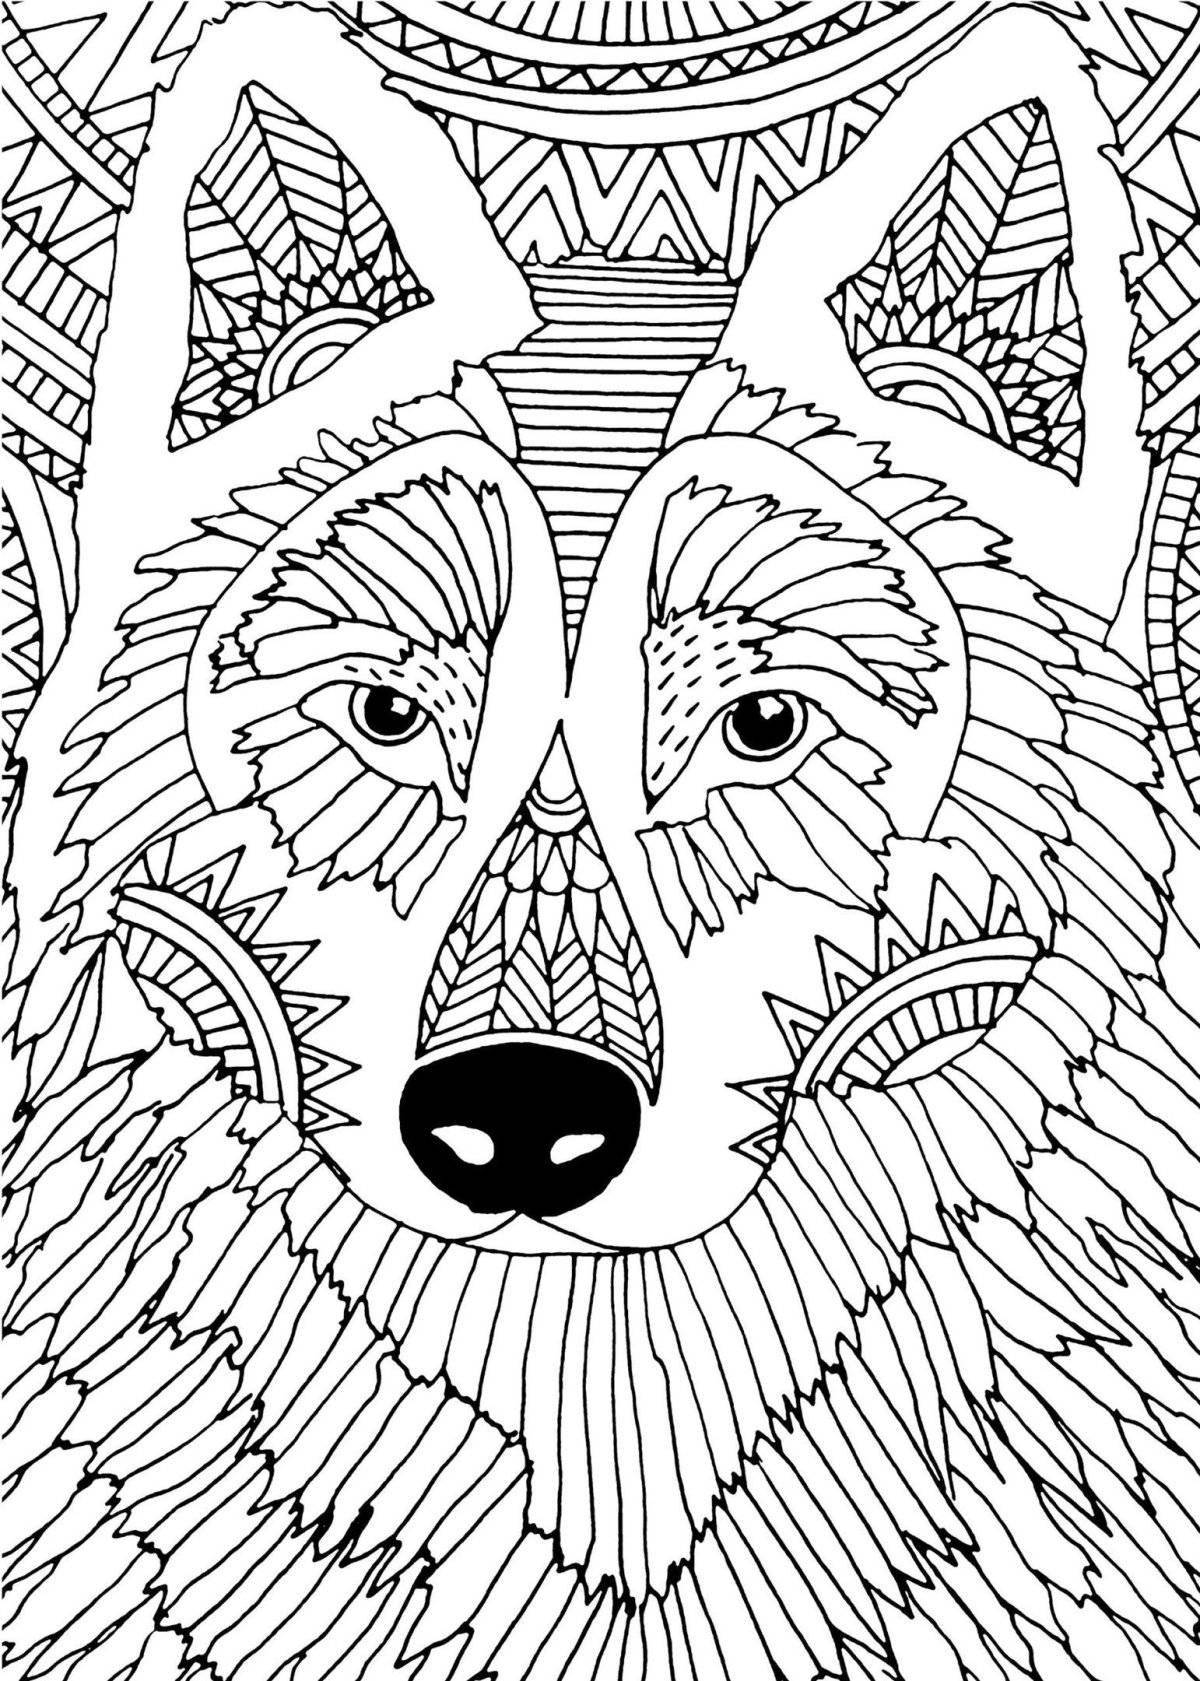 Exciting nerve coloring page